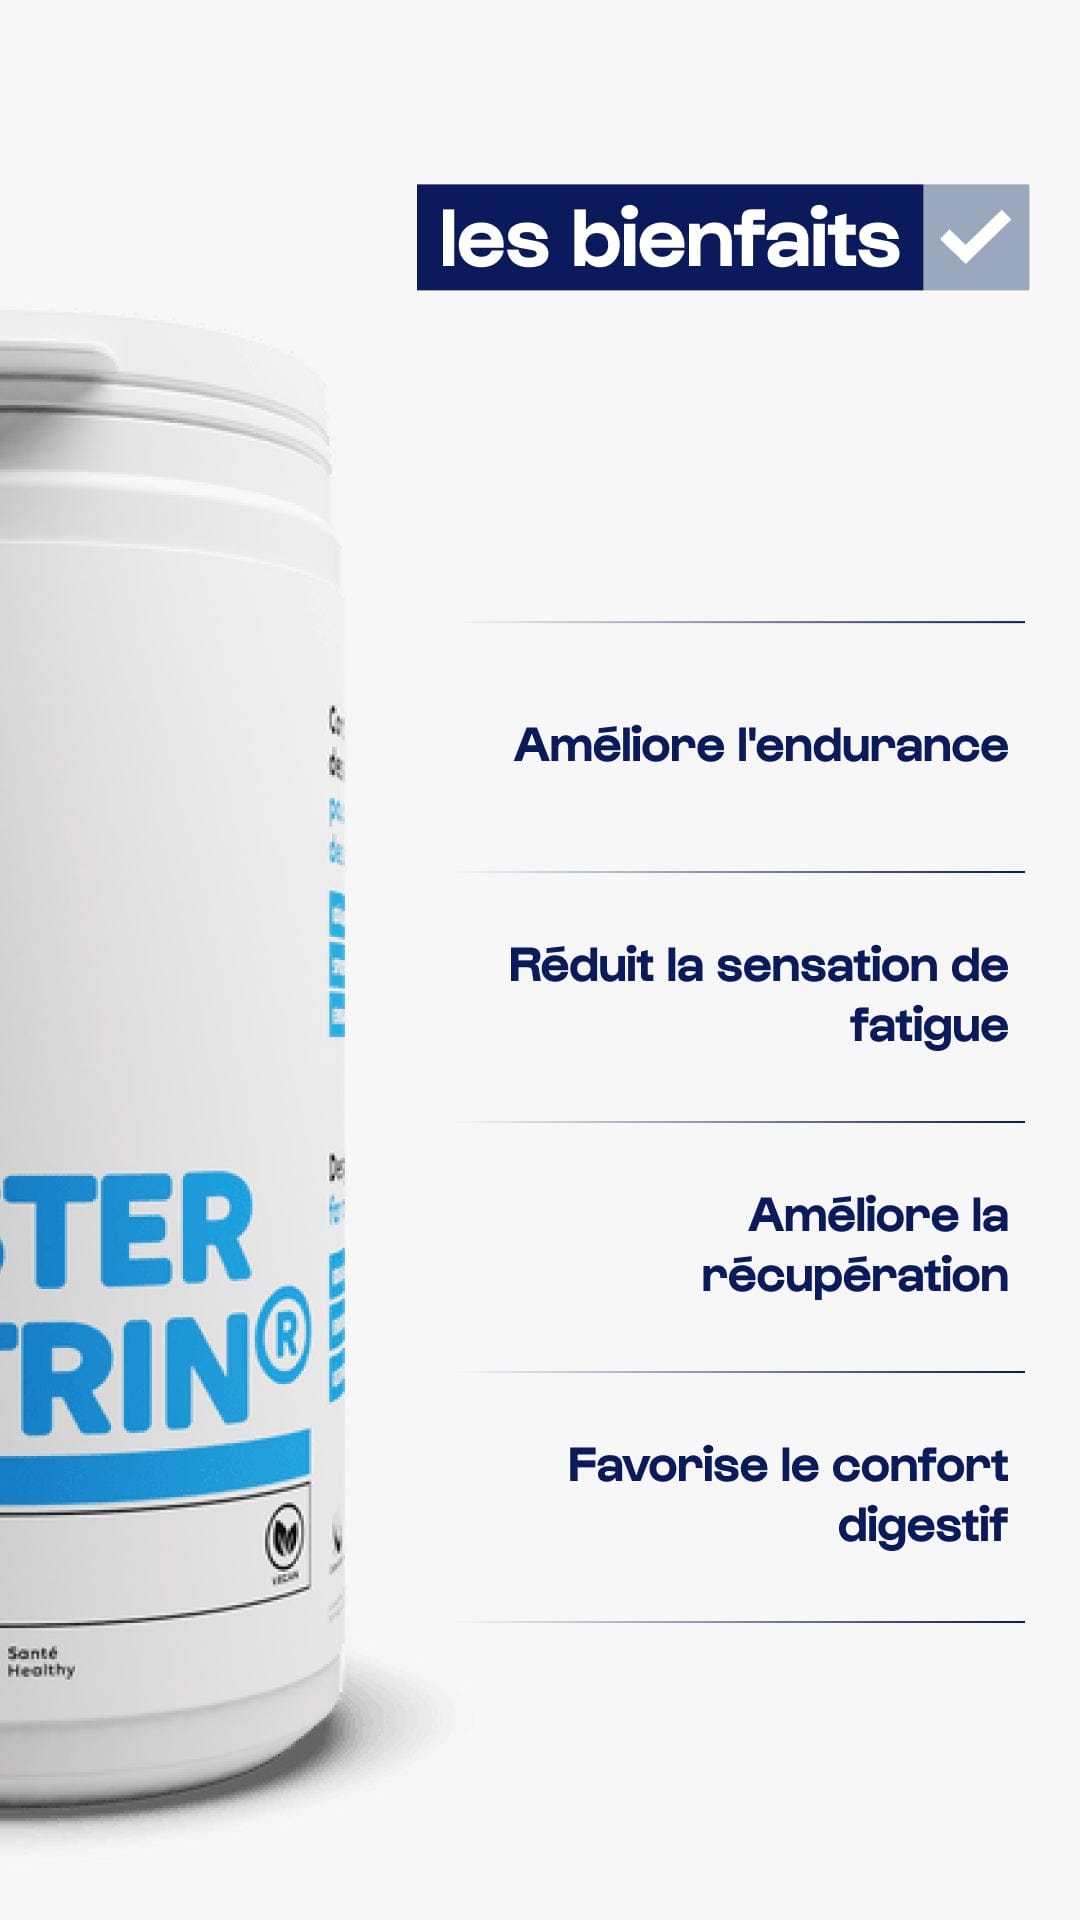 Nutrimuscle Glucides Cluster Dextrin®